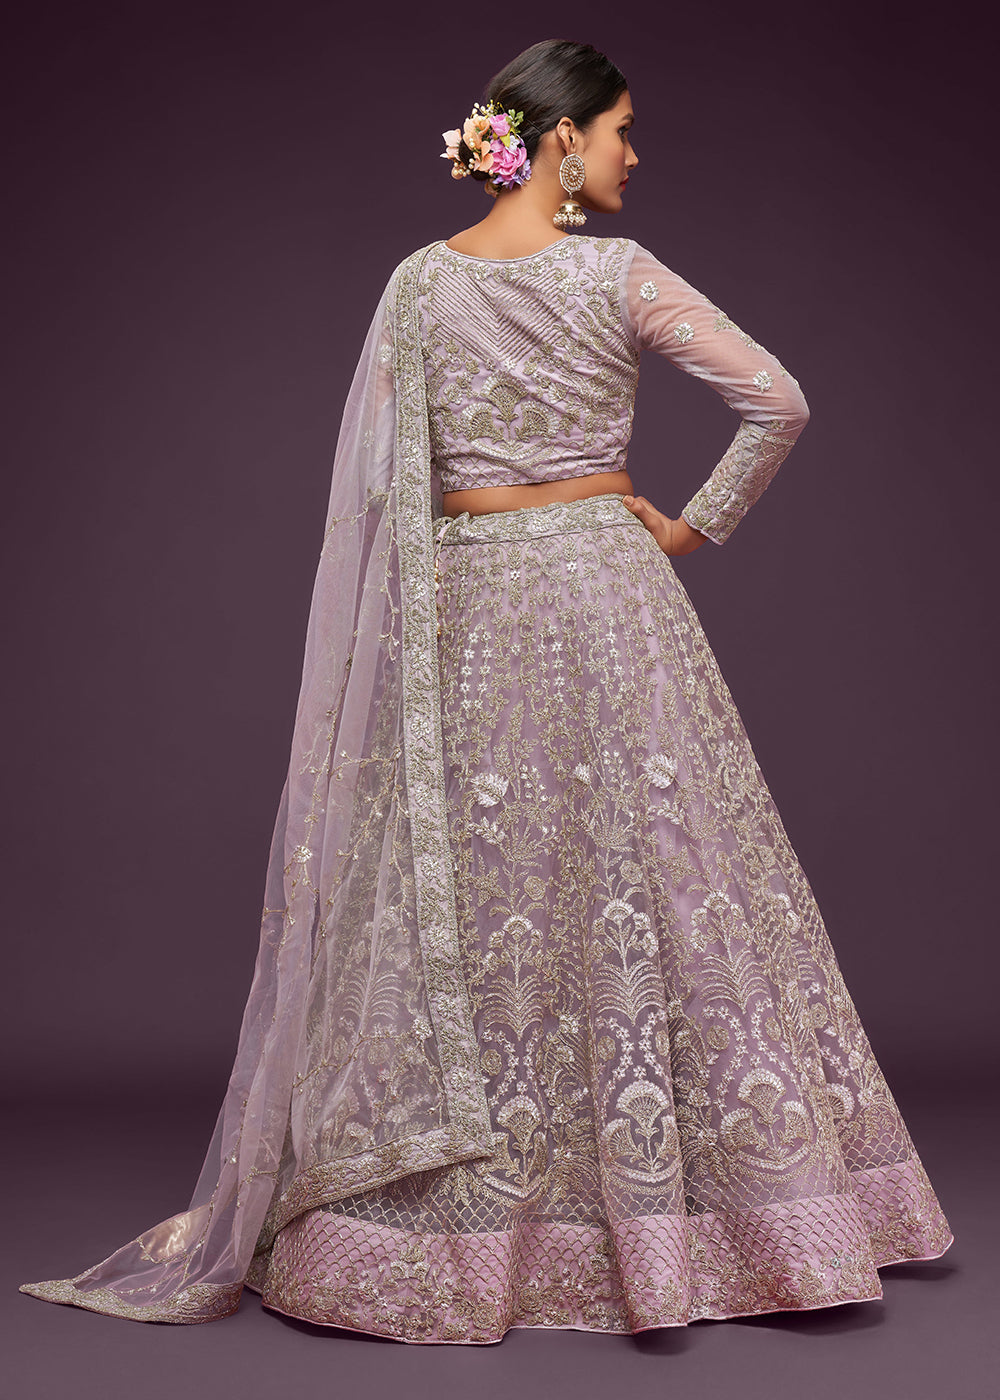 Buy Royal Golden Embroidered Bridal Lehenga | Q by Sonia